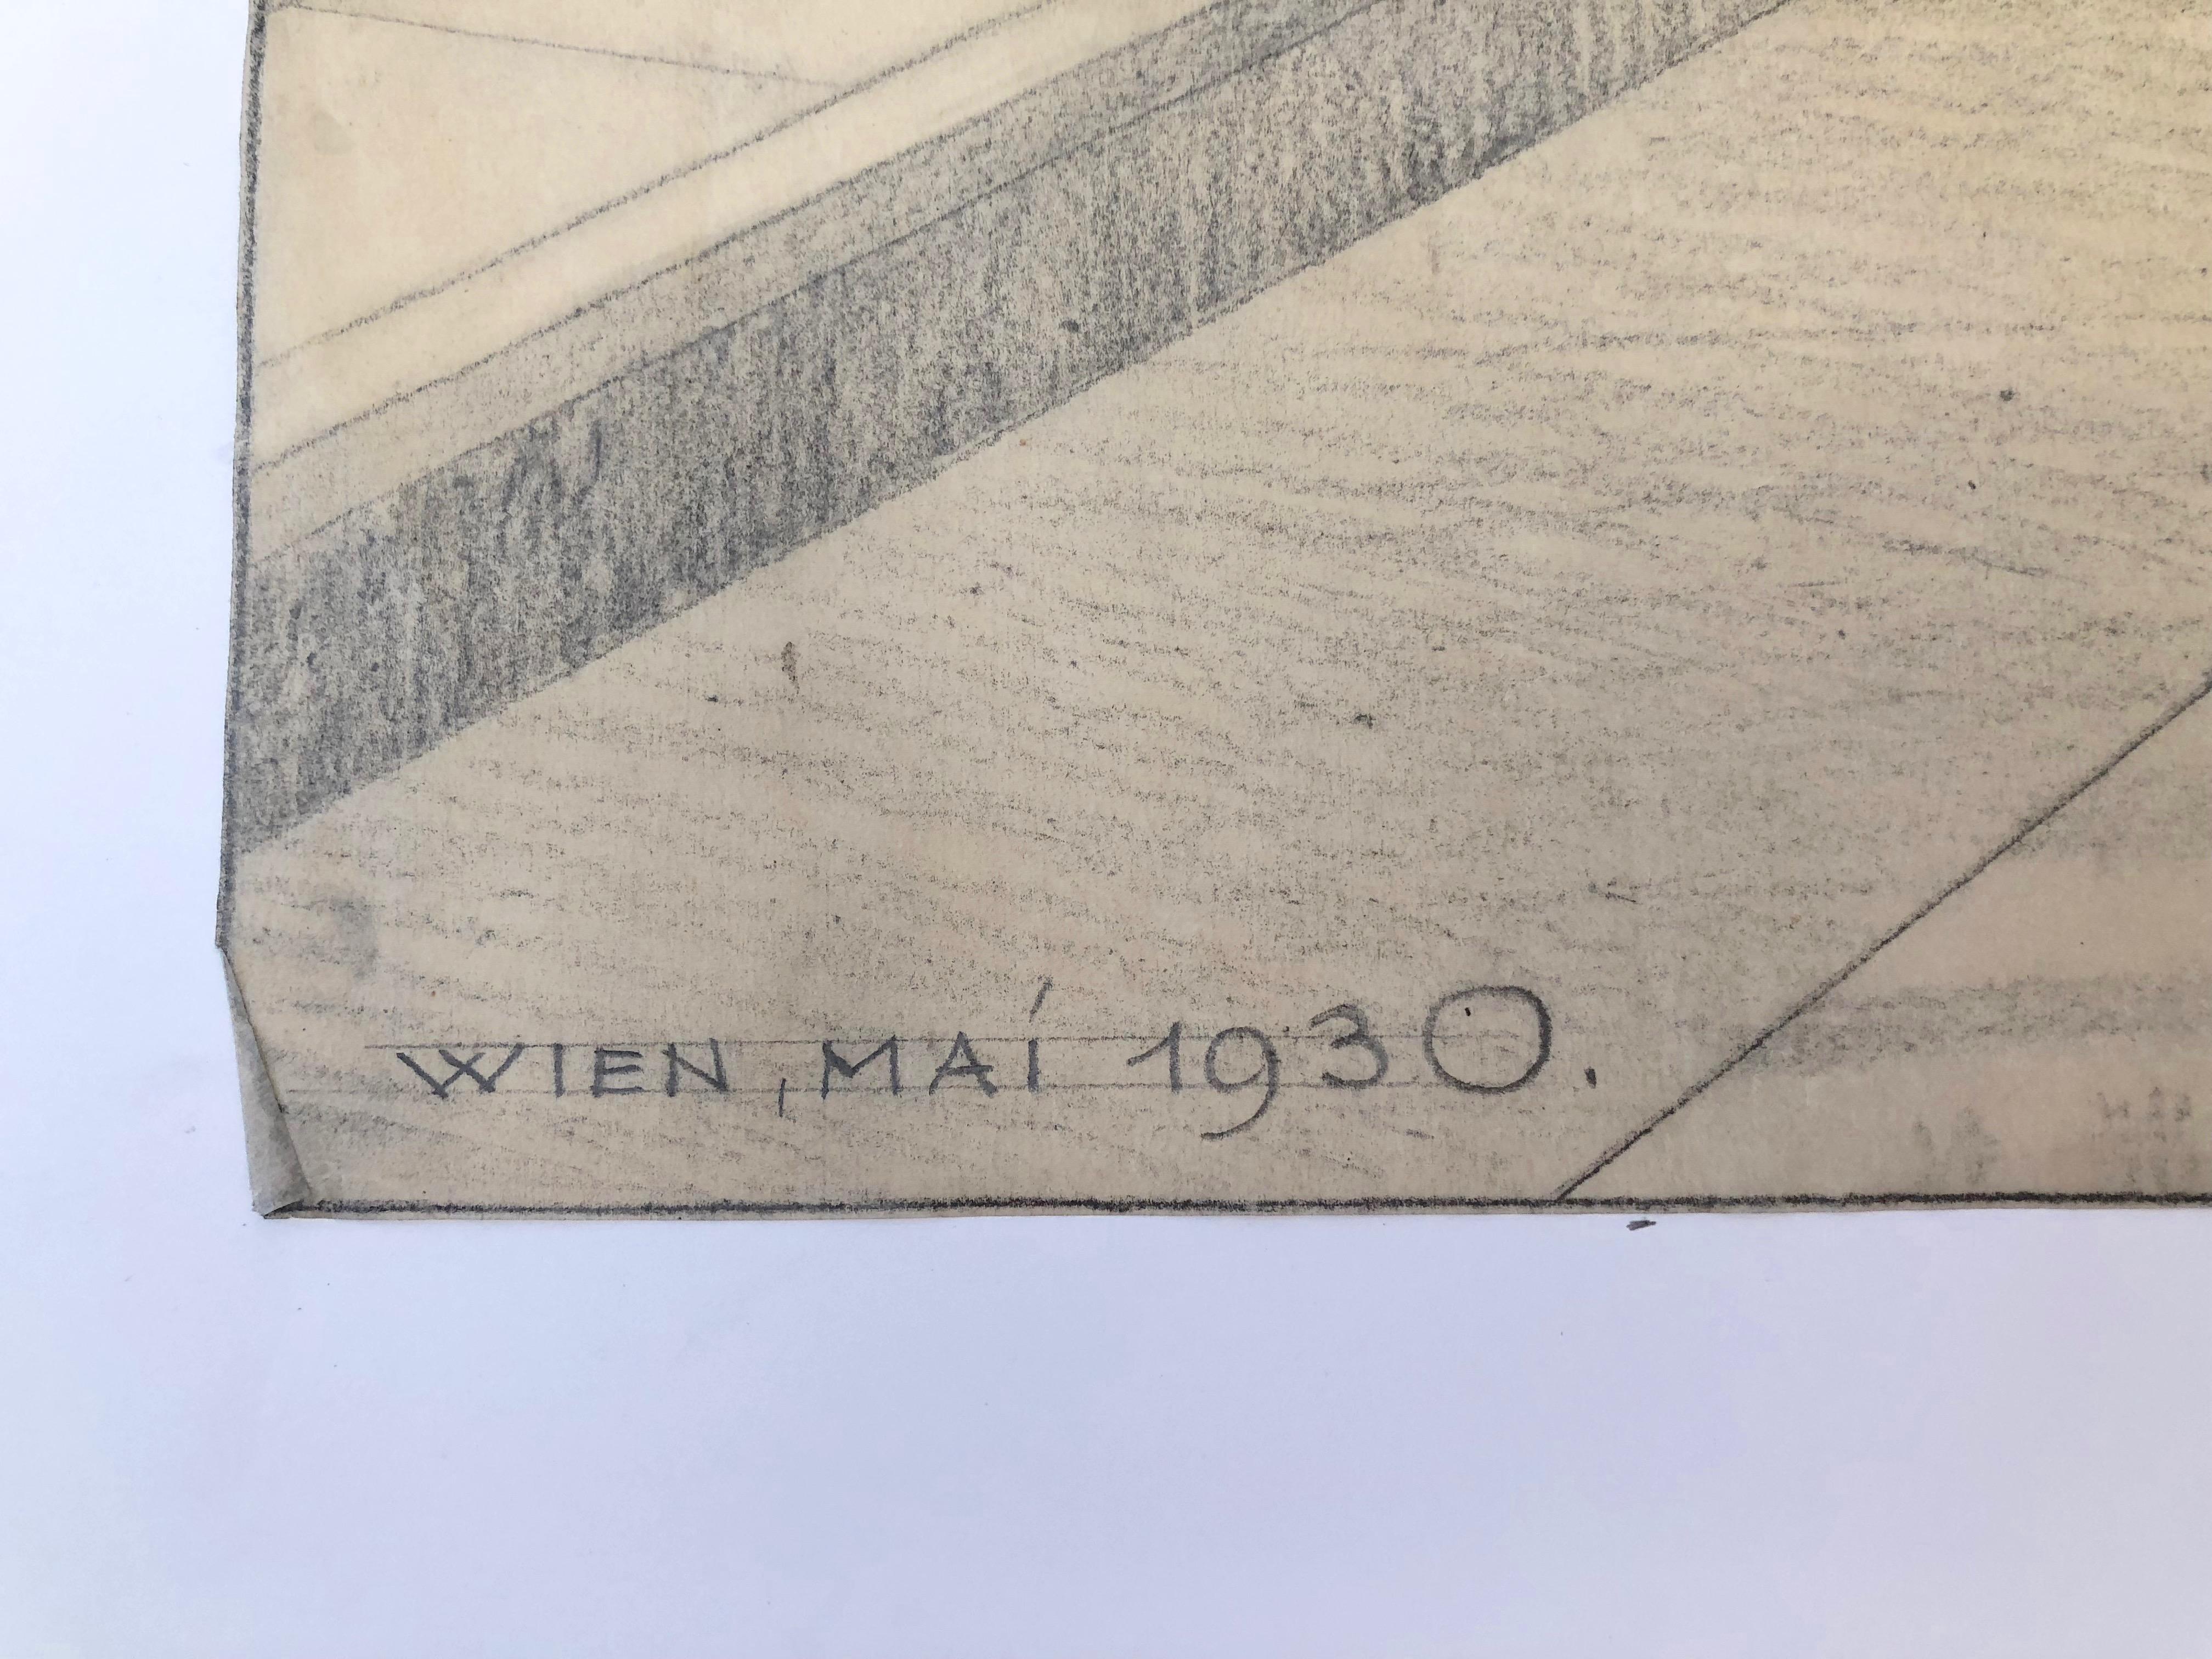 This is a rare set of 5 drawings concerning the Free Masons Lodge on the Schwind Gasse number 8, in the 4th district of Vienna. 
The drawings were made in 1930 in the month of May by architect Robert Gerlach. The lodge opened on September 12,